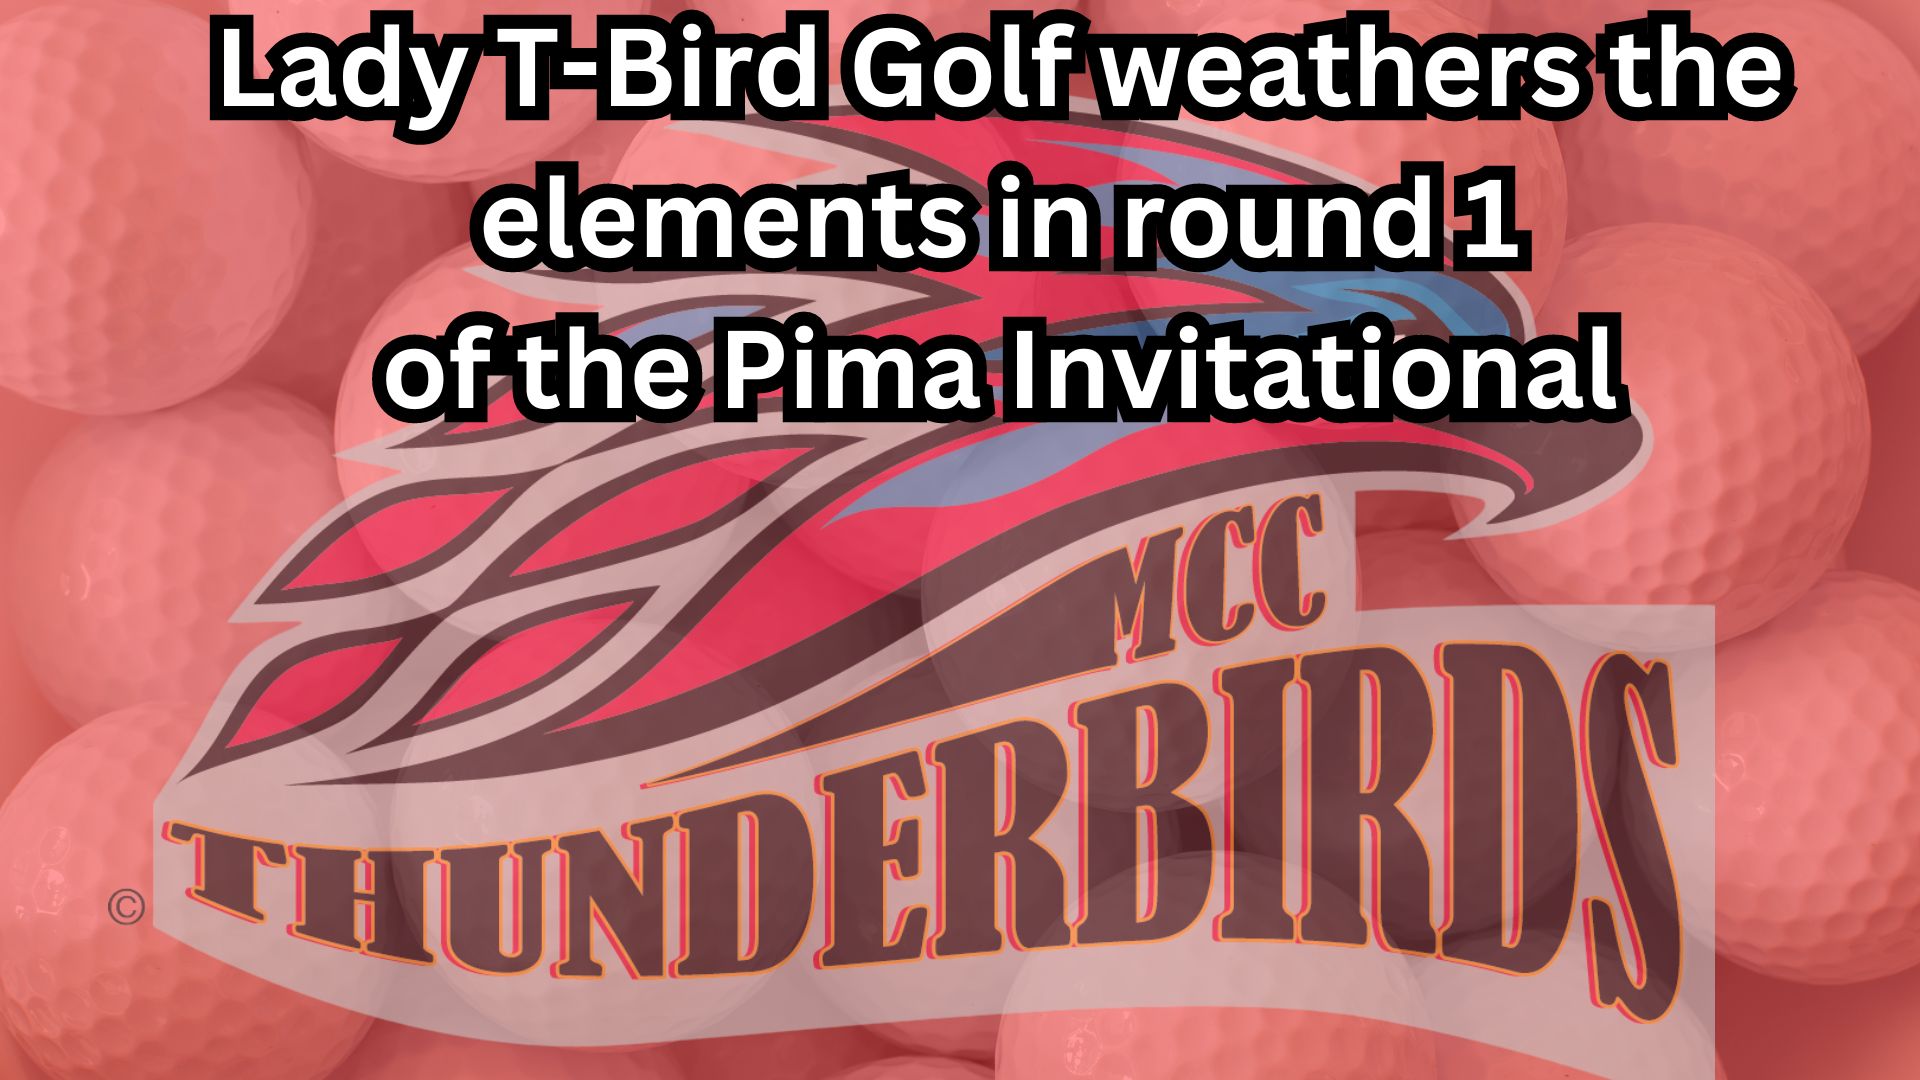 Lady T-Birds lead after stormy conditions in Pima Invitational